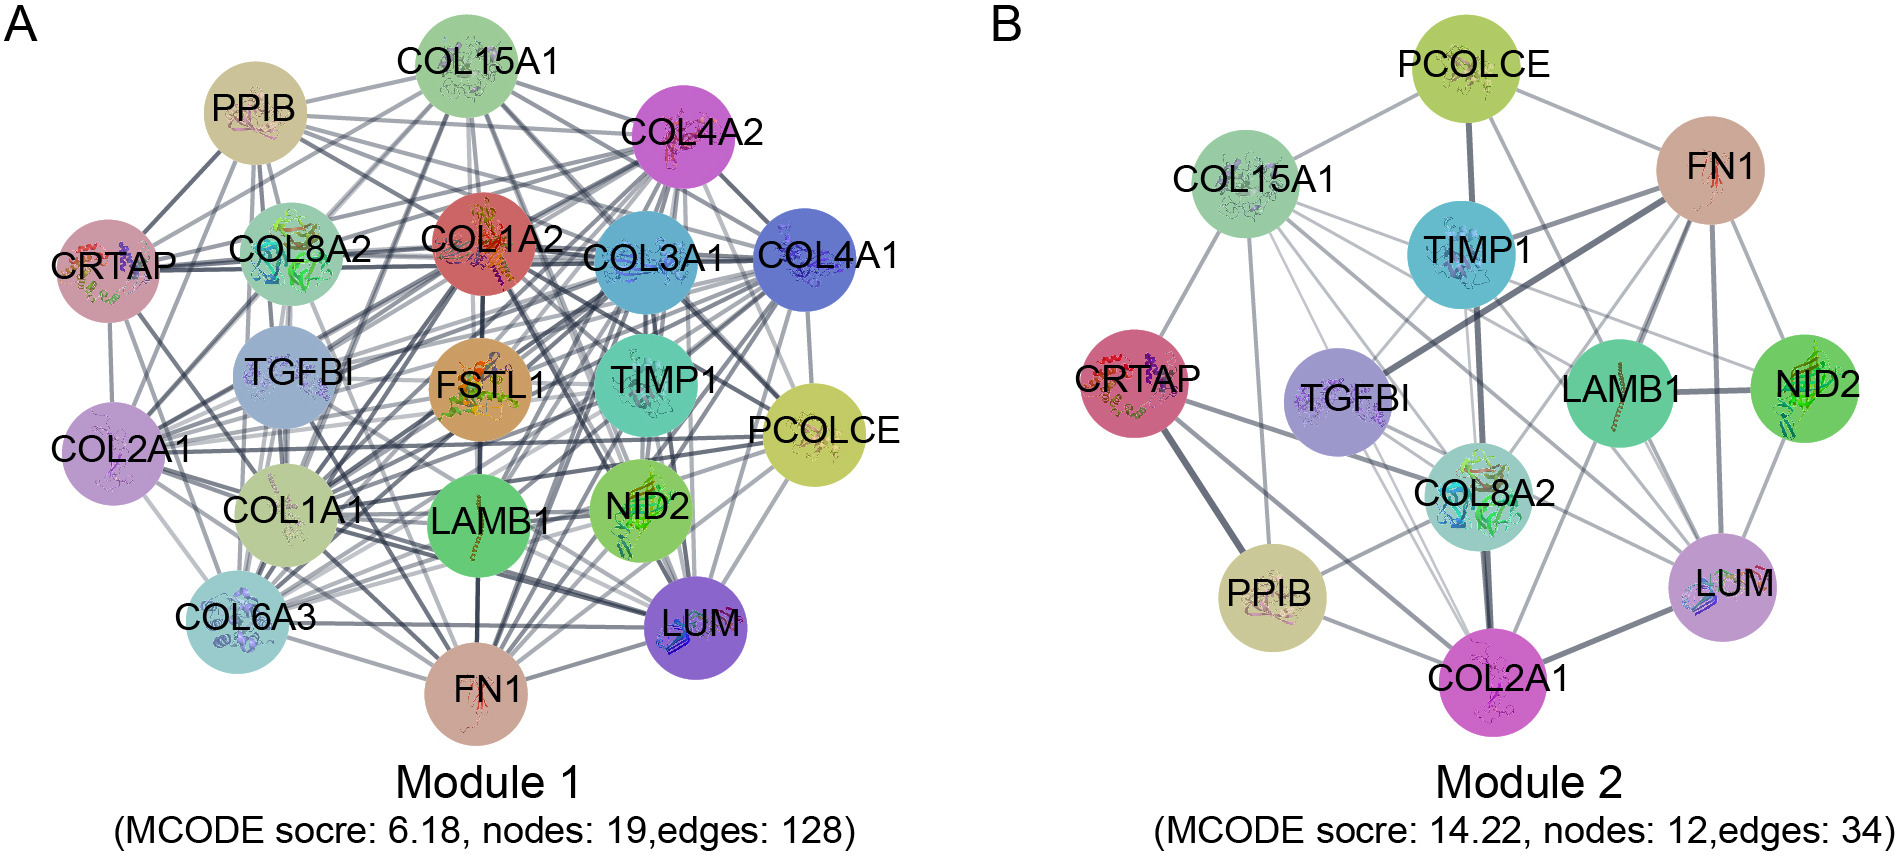 Fig. 5 
            The module analysis of the protein-protein interaction (PPI) network. a) Module 1 contained 19 gene nodes and 128 edges, MCODE score = 6.18. b) Module 2 contained 12 upregulated gene nodes and 34 edges, MCODE score = 14.22.
          